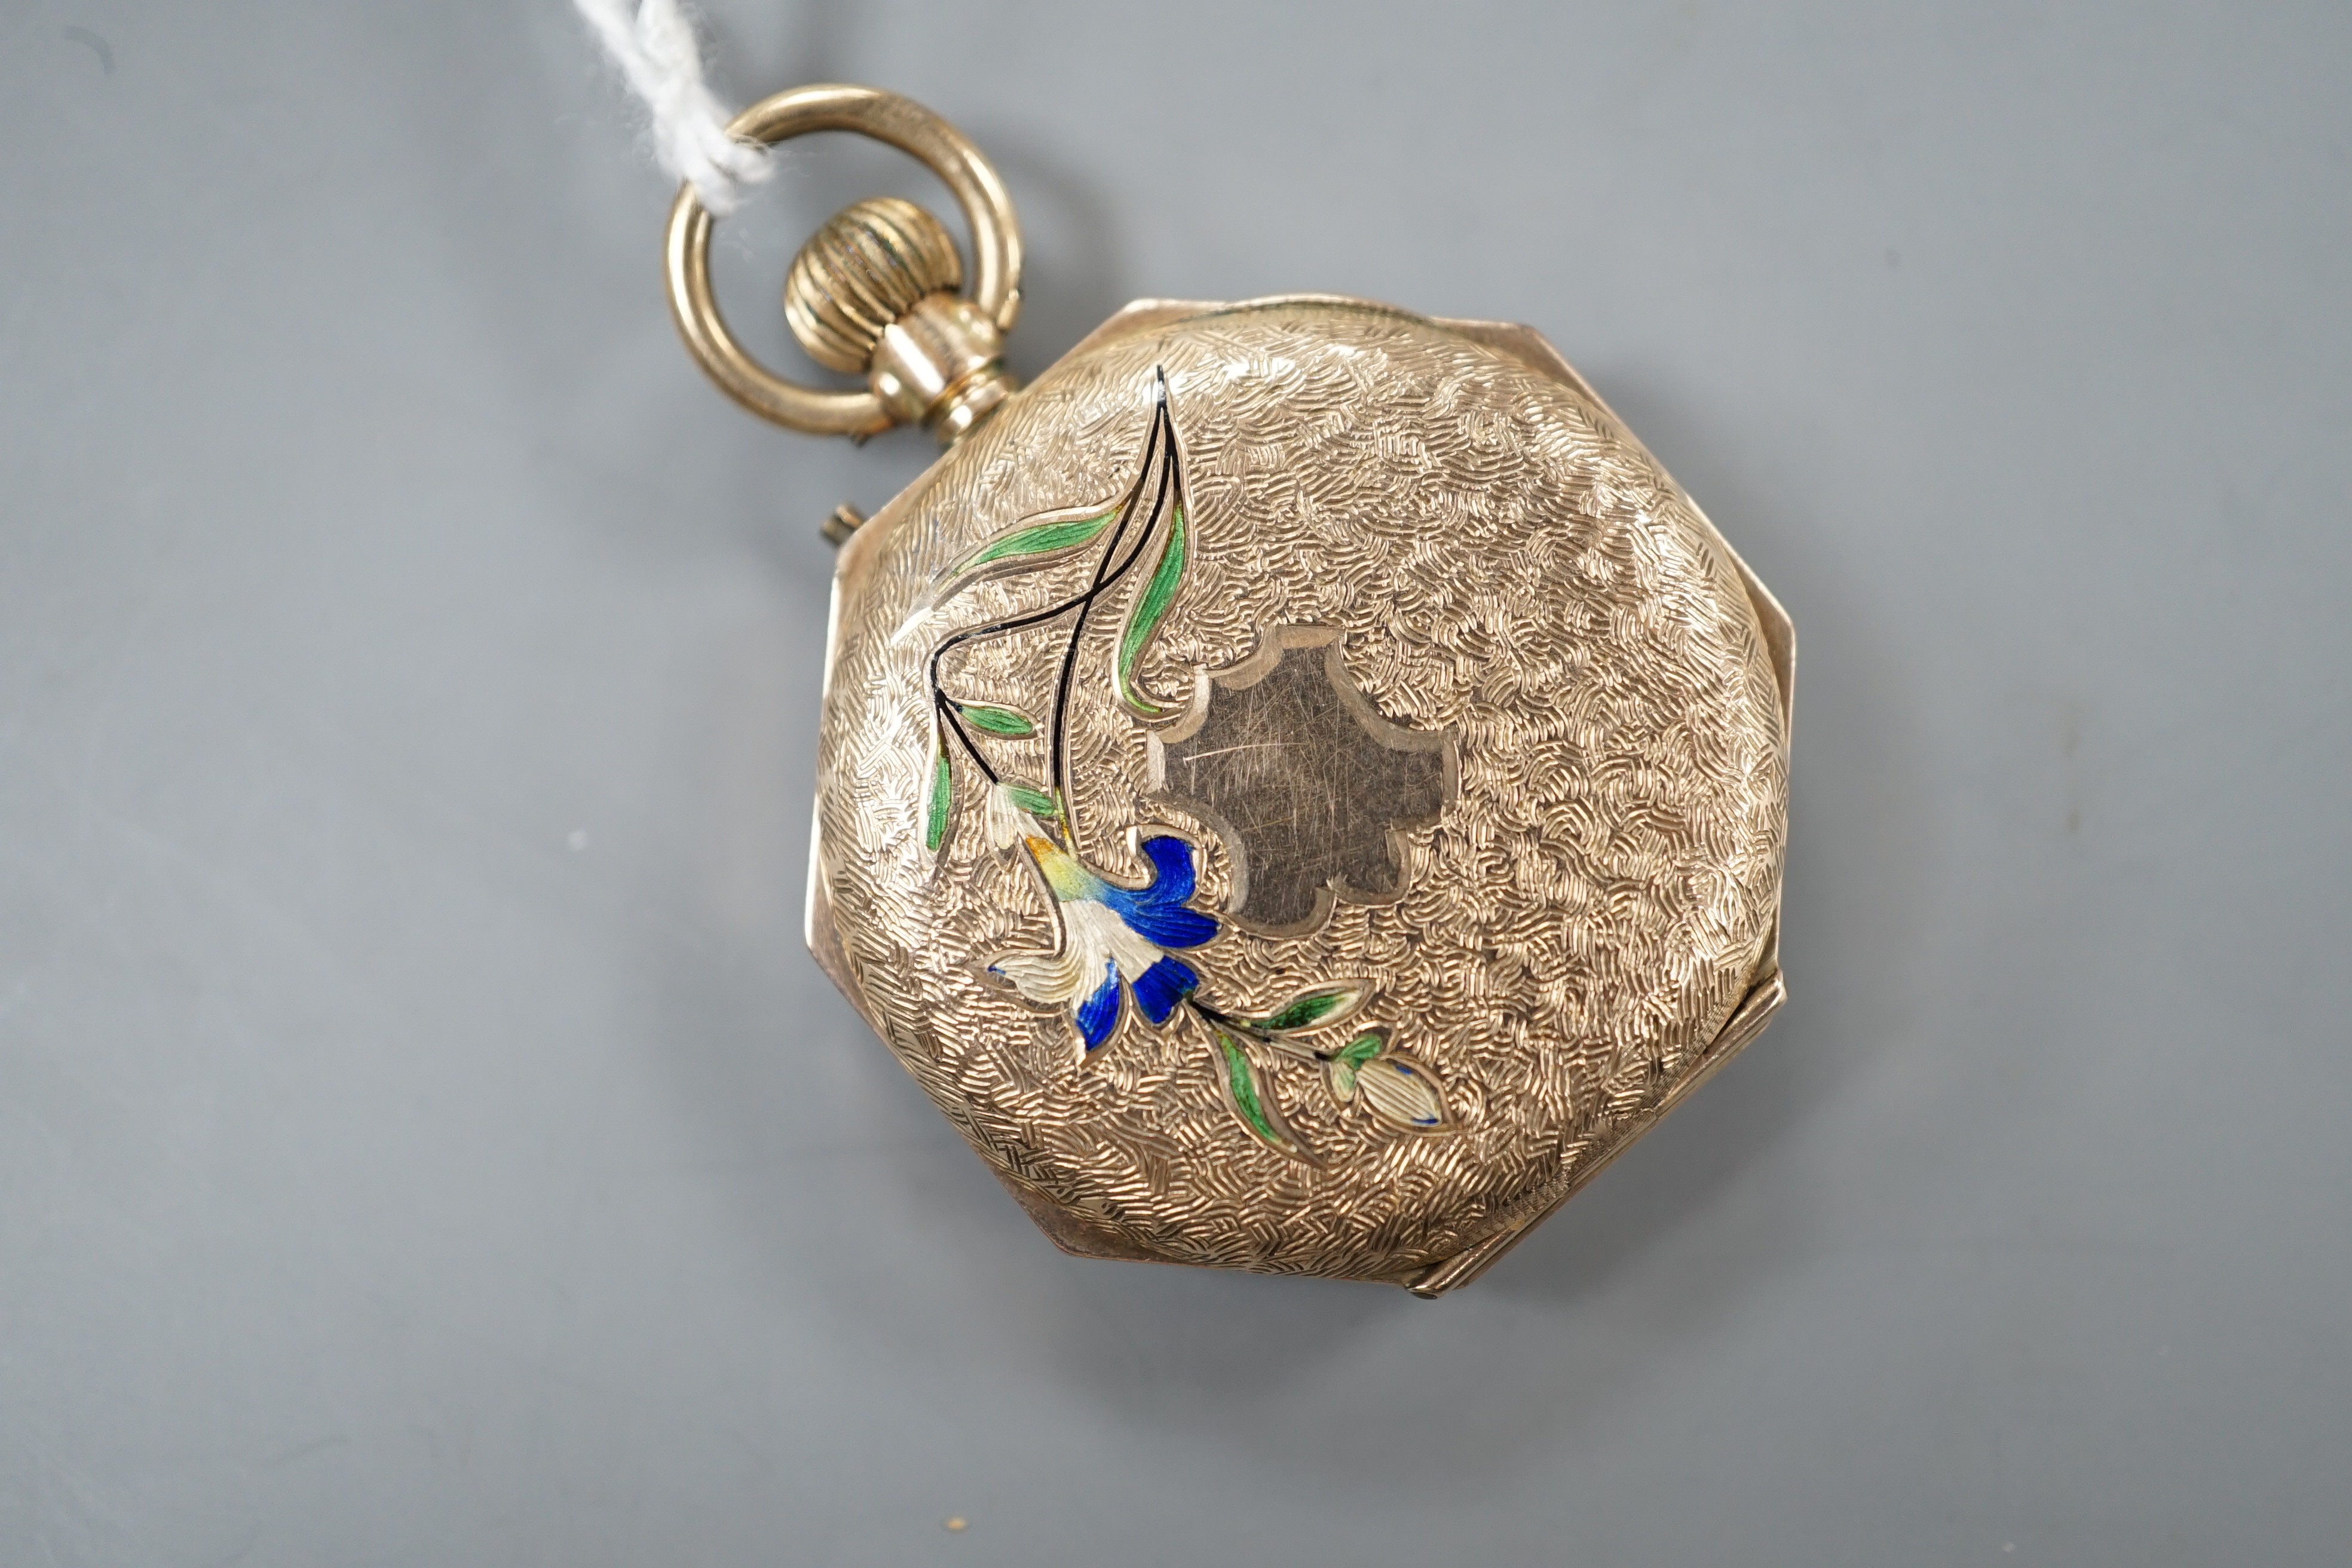 A 1920's 9ct gold and enamel octagonal fob watch, with Roman dial, case diameter 31mm, gross weight 23 grams.